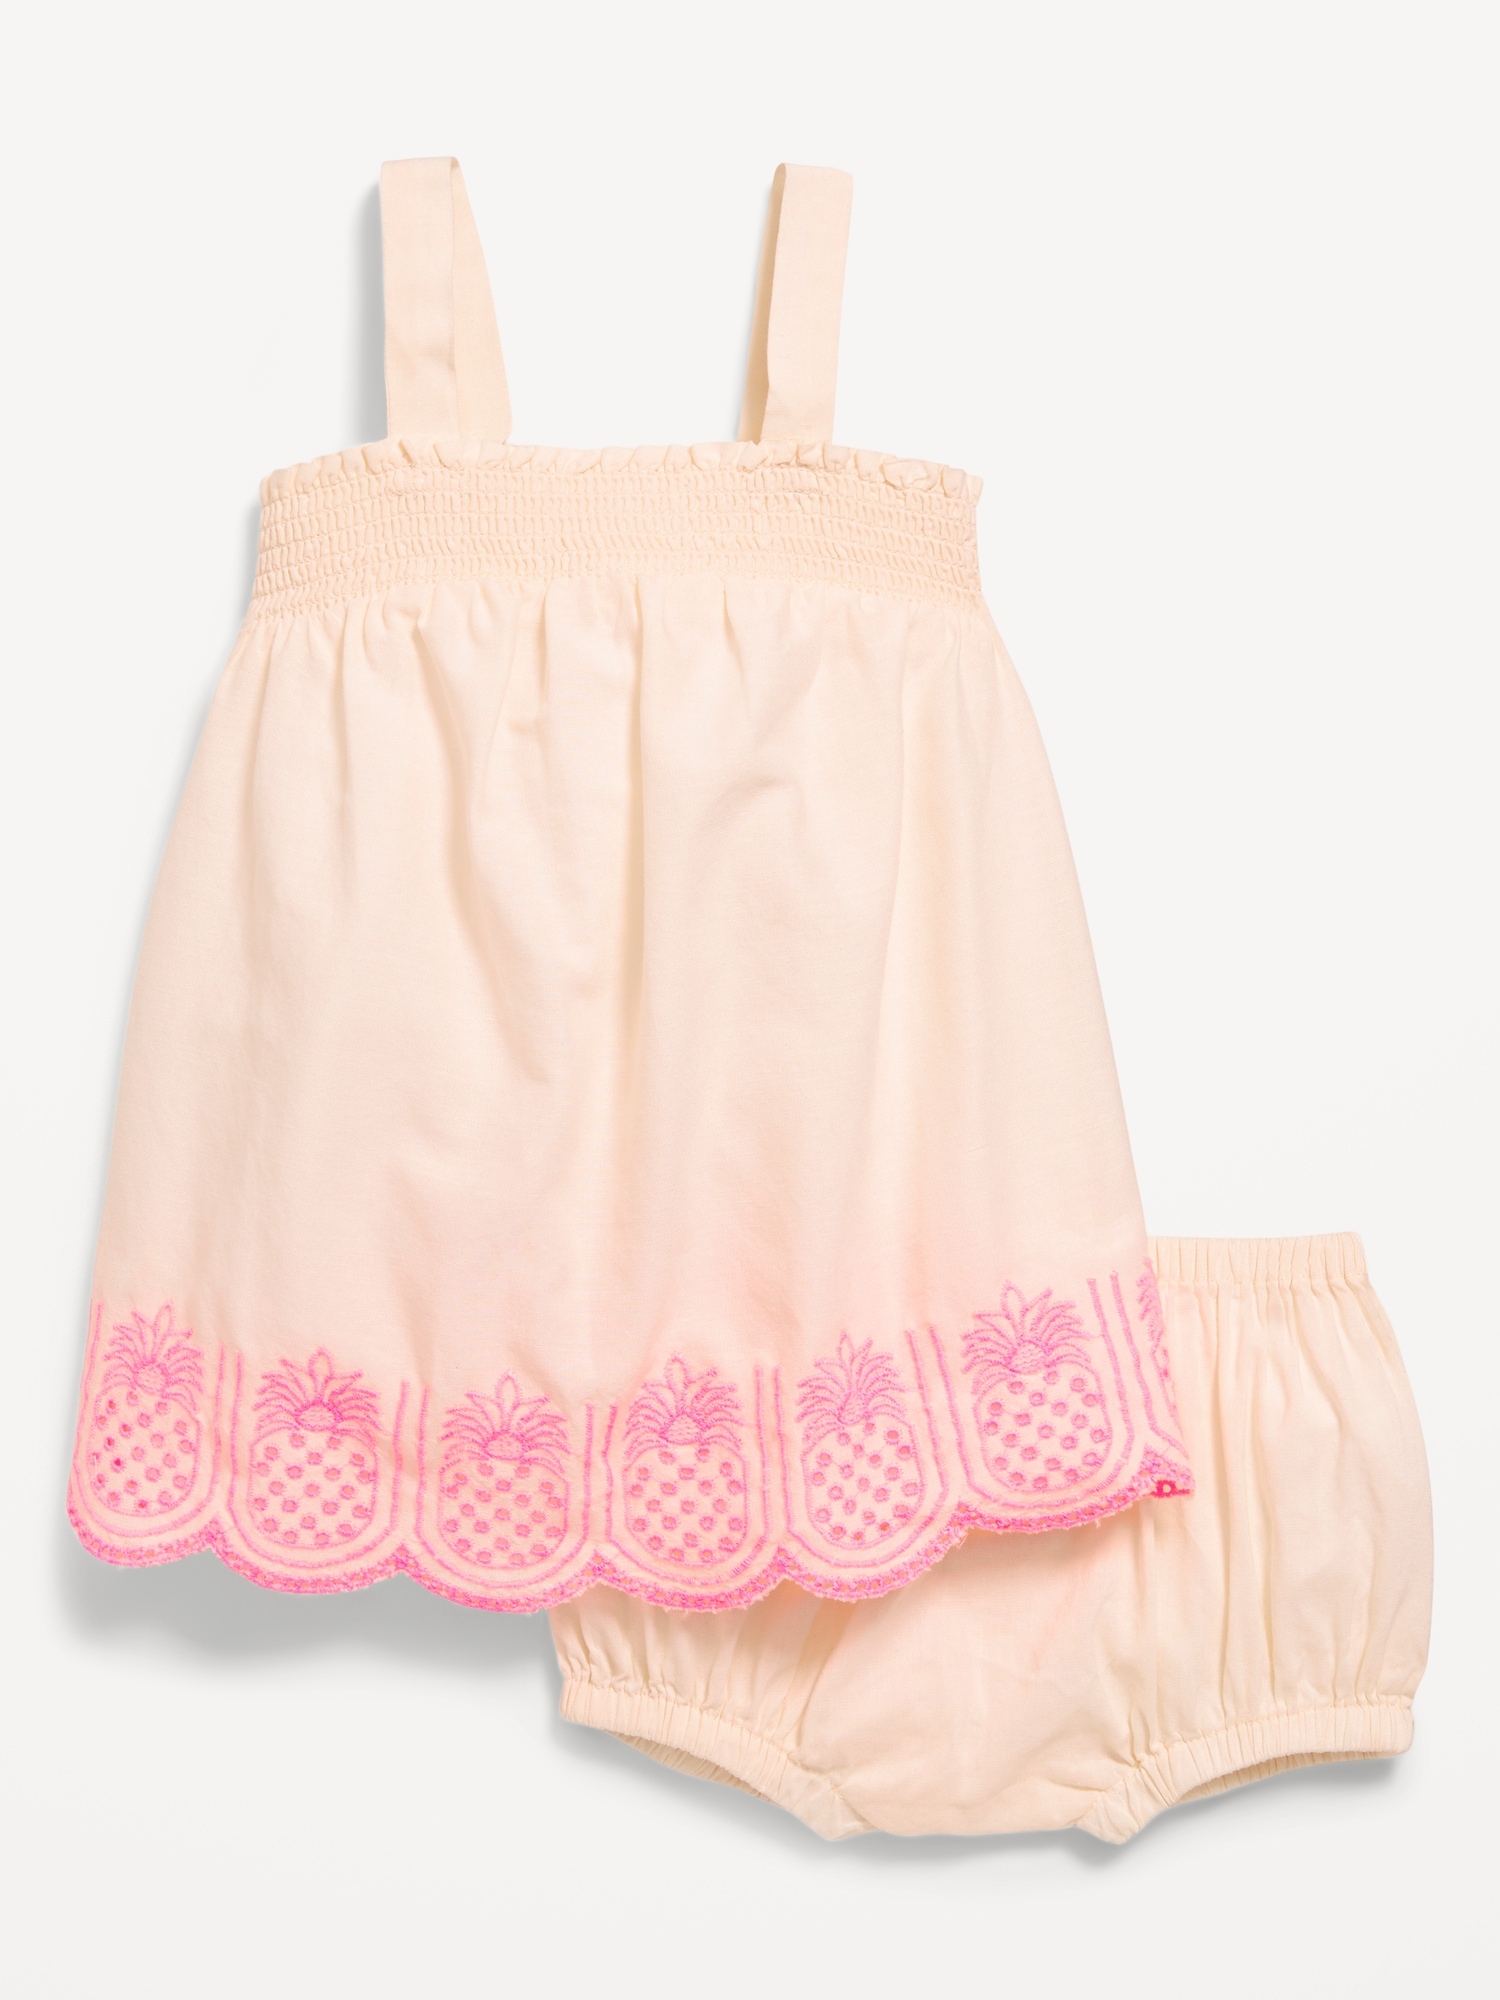 Sleeveless Smocked Embroidered Top and Bloomer Shorts Set for Baby